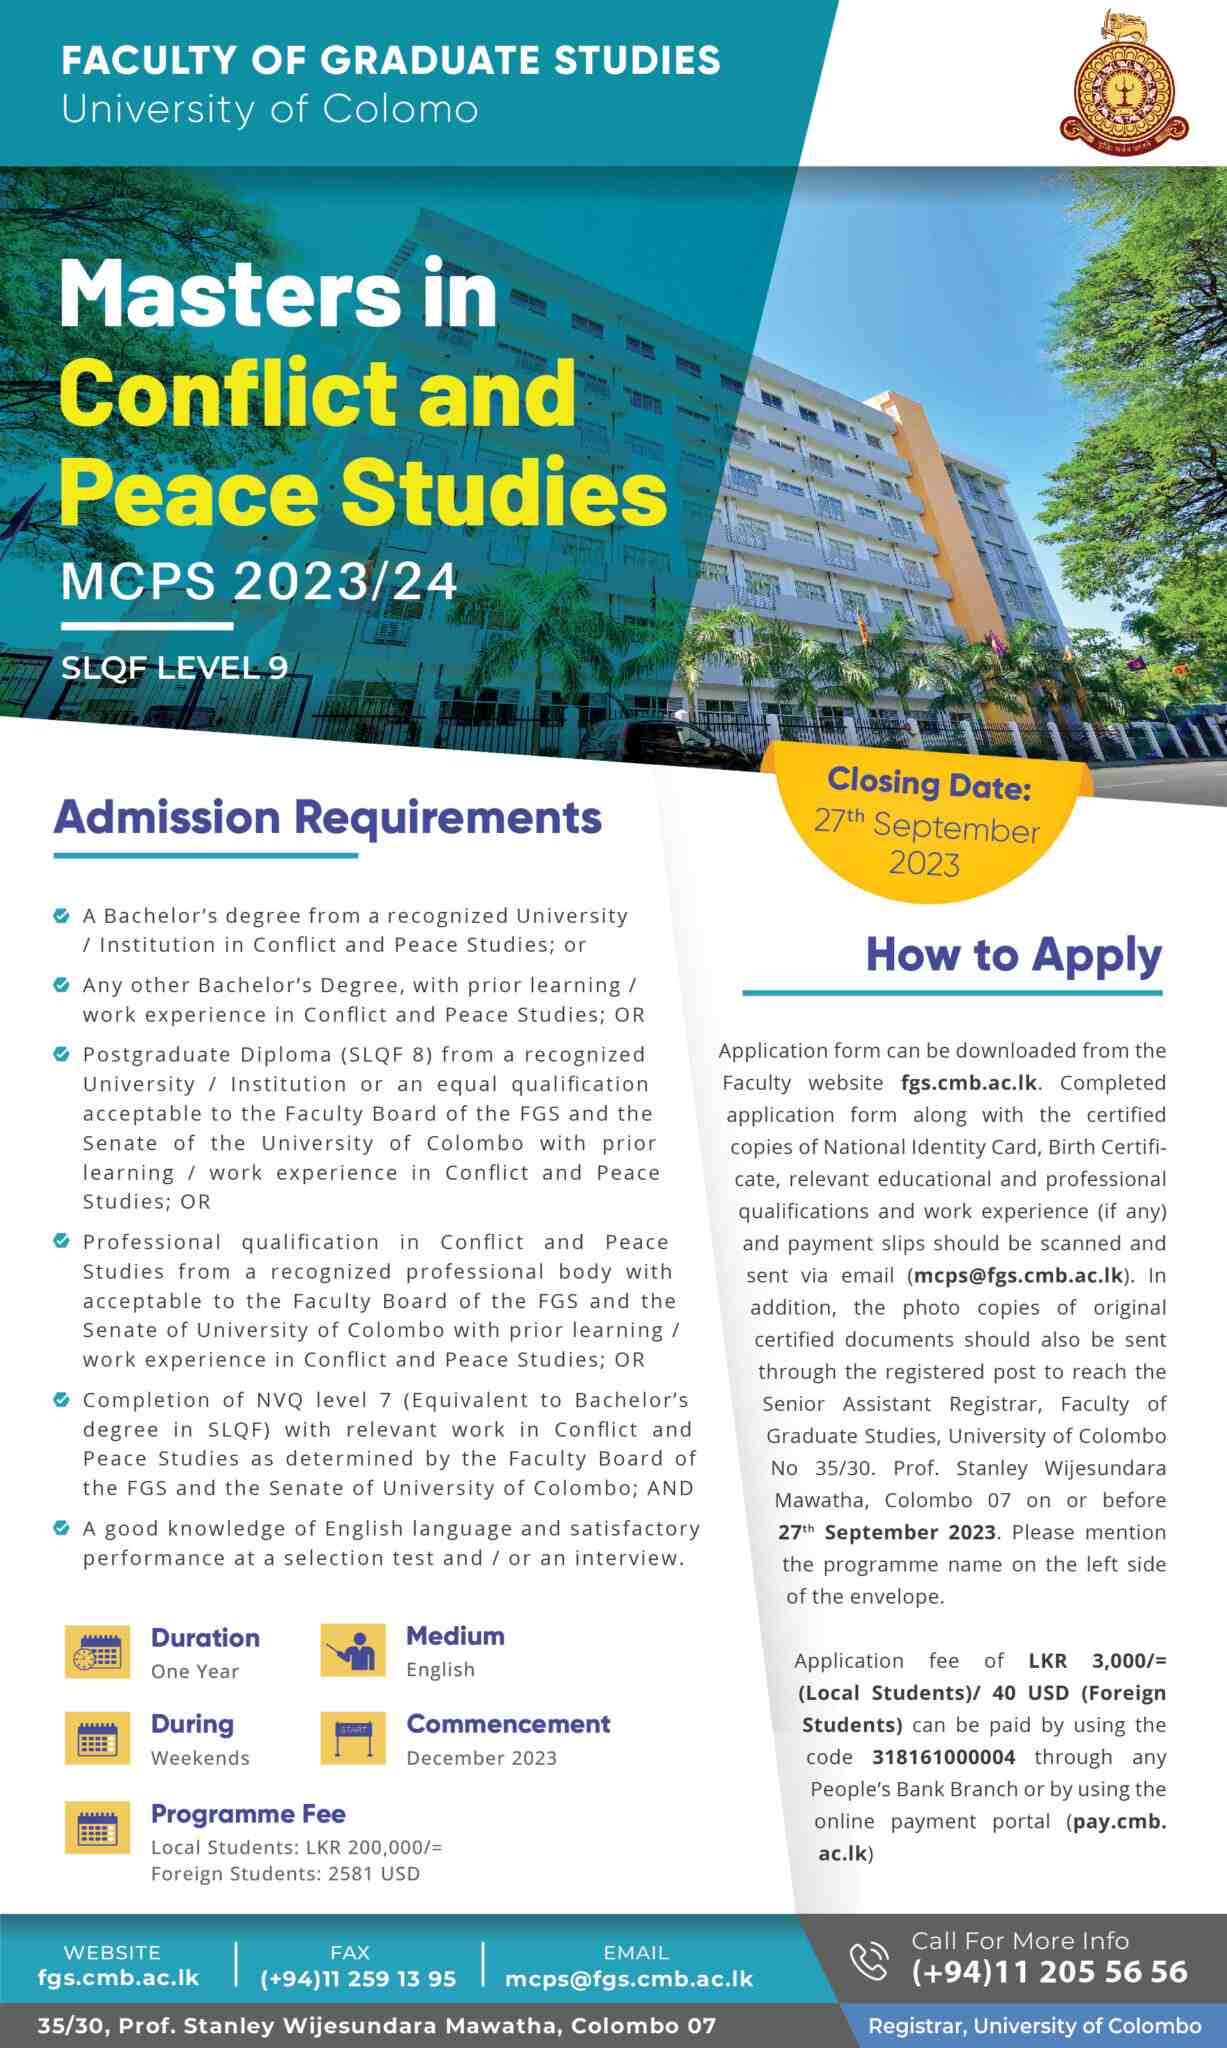 Masters in Conflict and Peace Studies - MCPS 2023/24